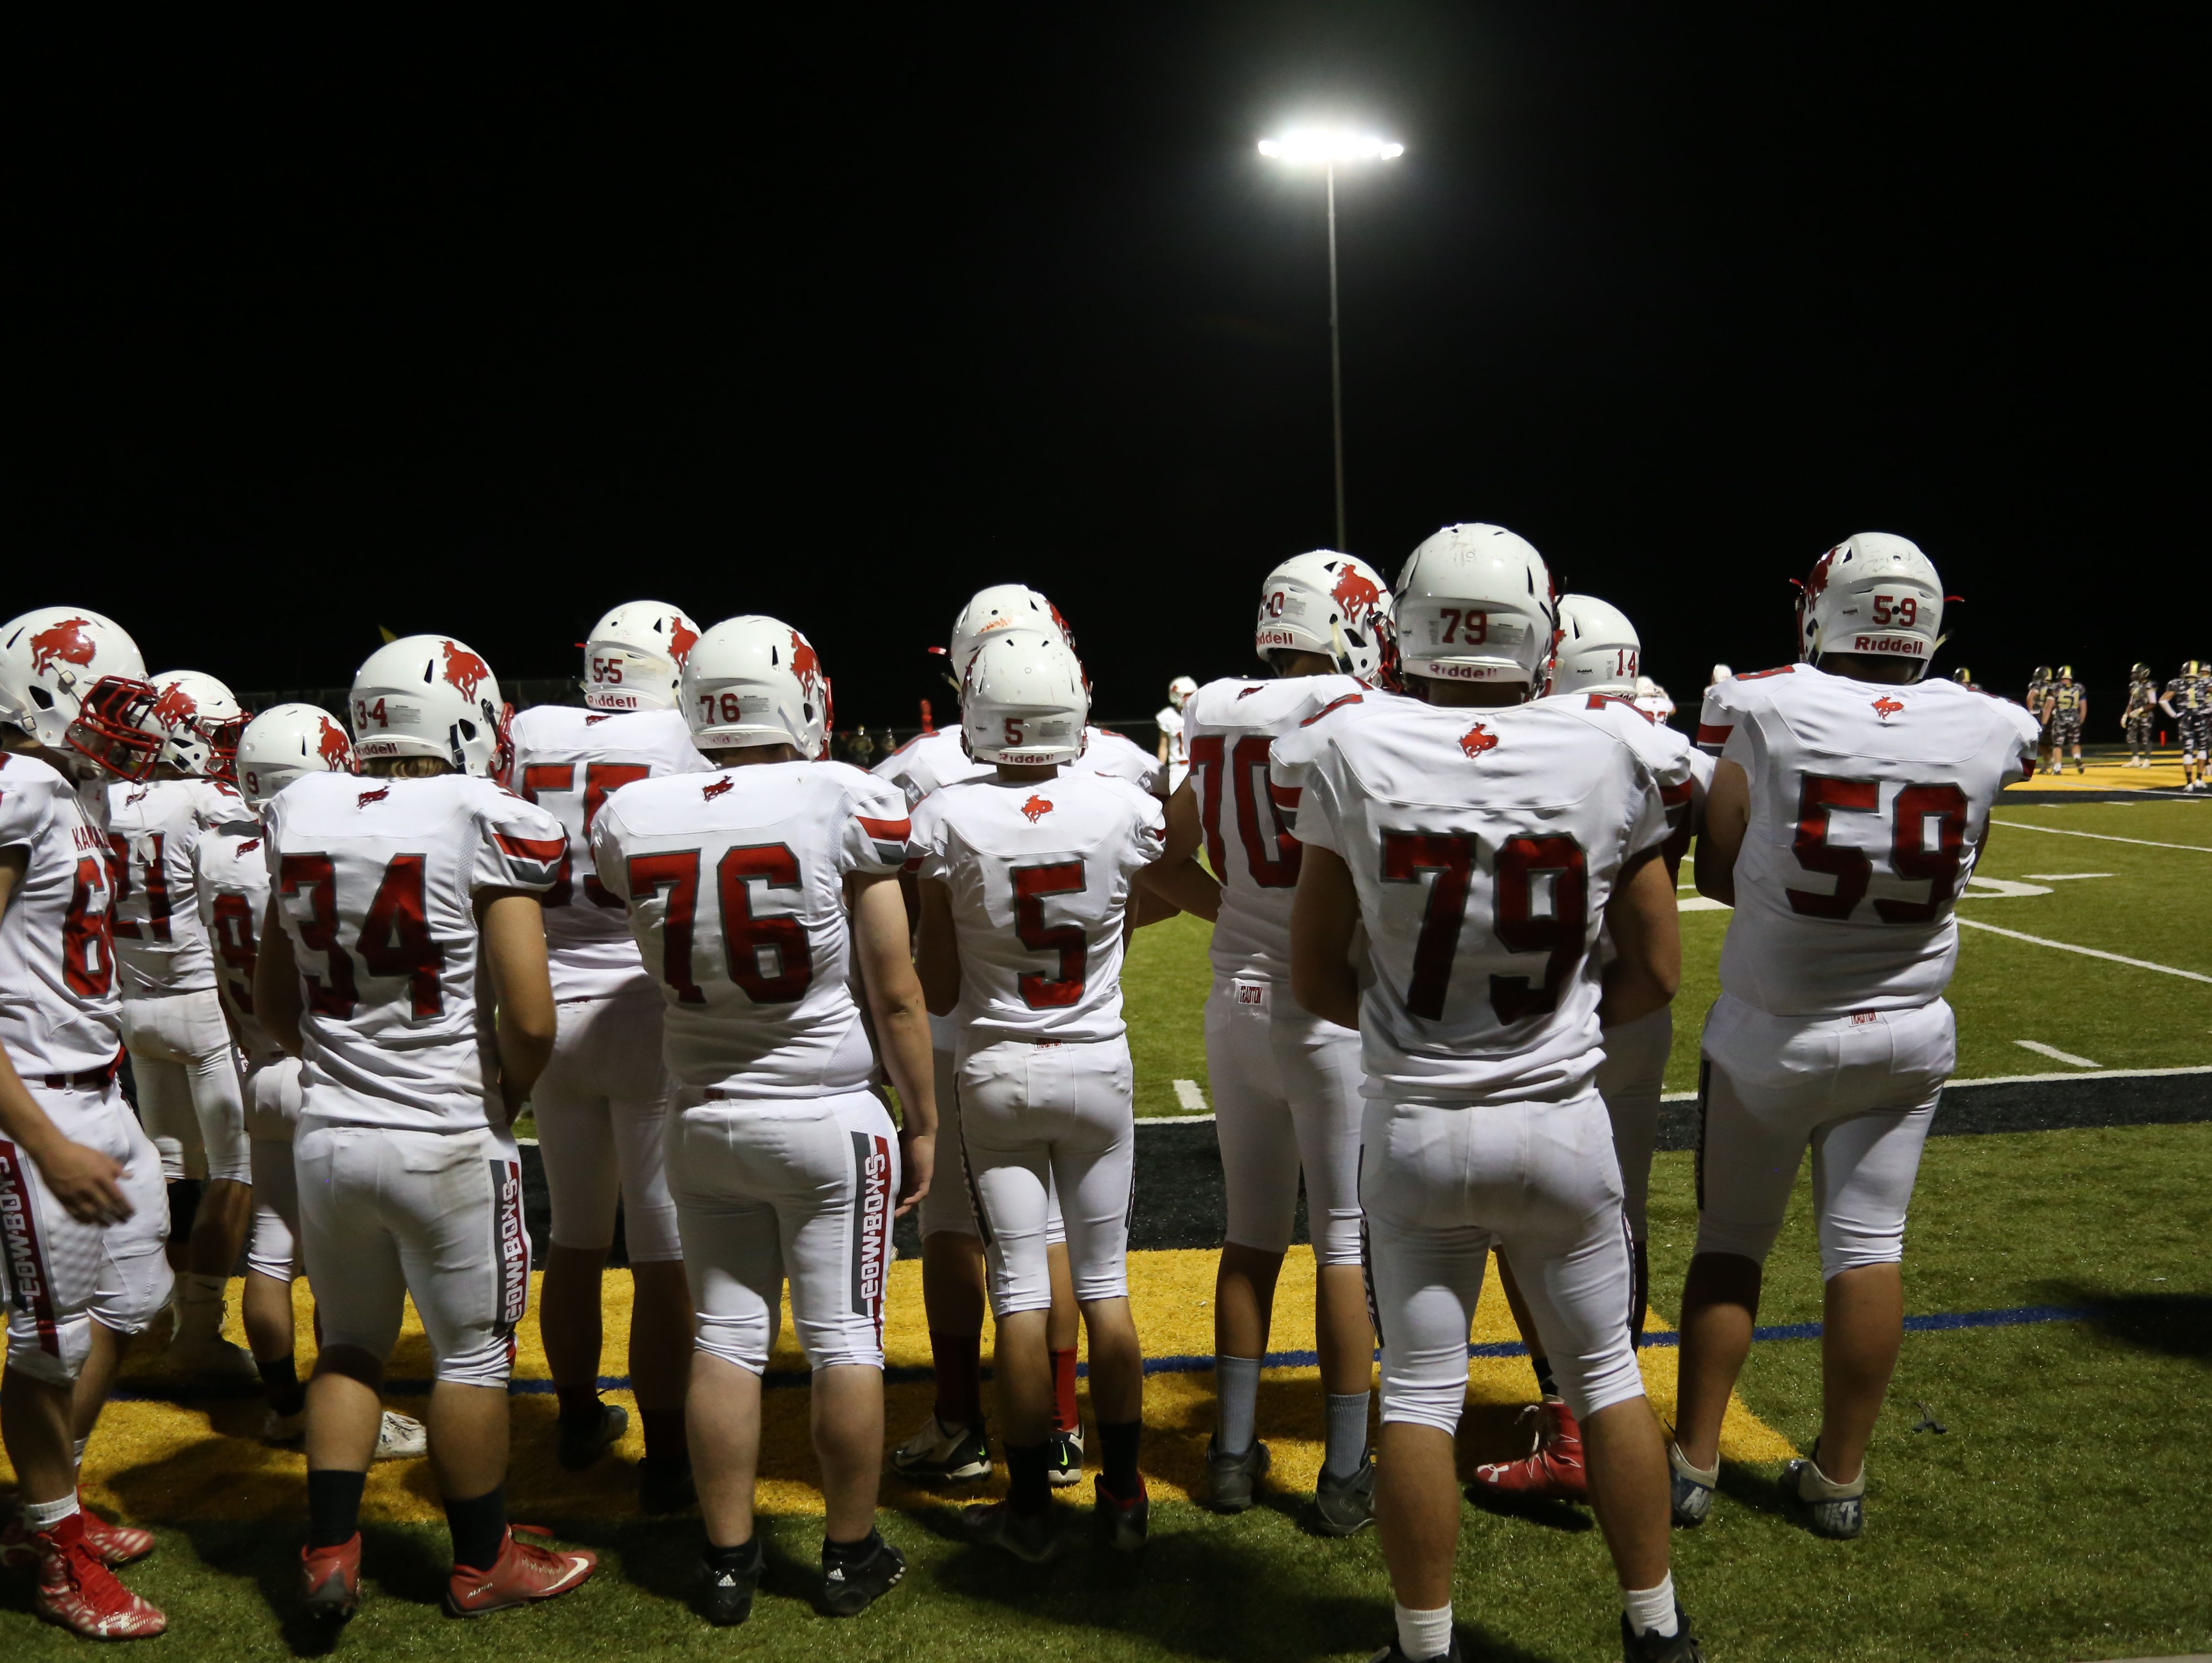 Kanab defeated Diamond Ranch 40-18 Friday night in rematch of last year’s 1A state title game.